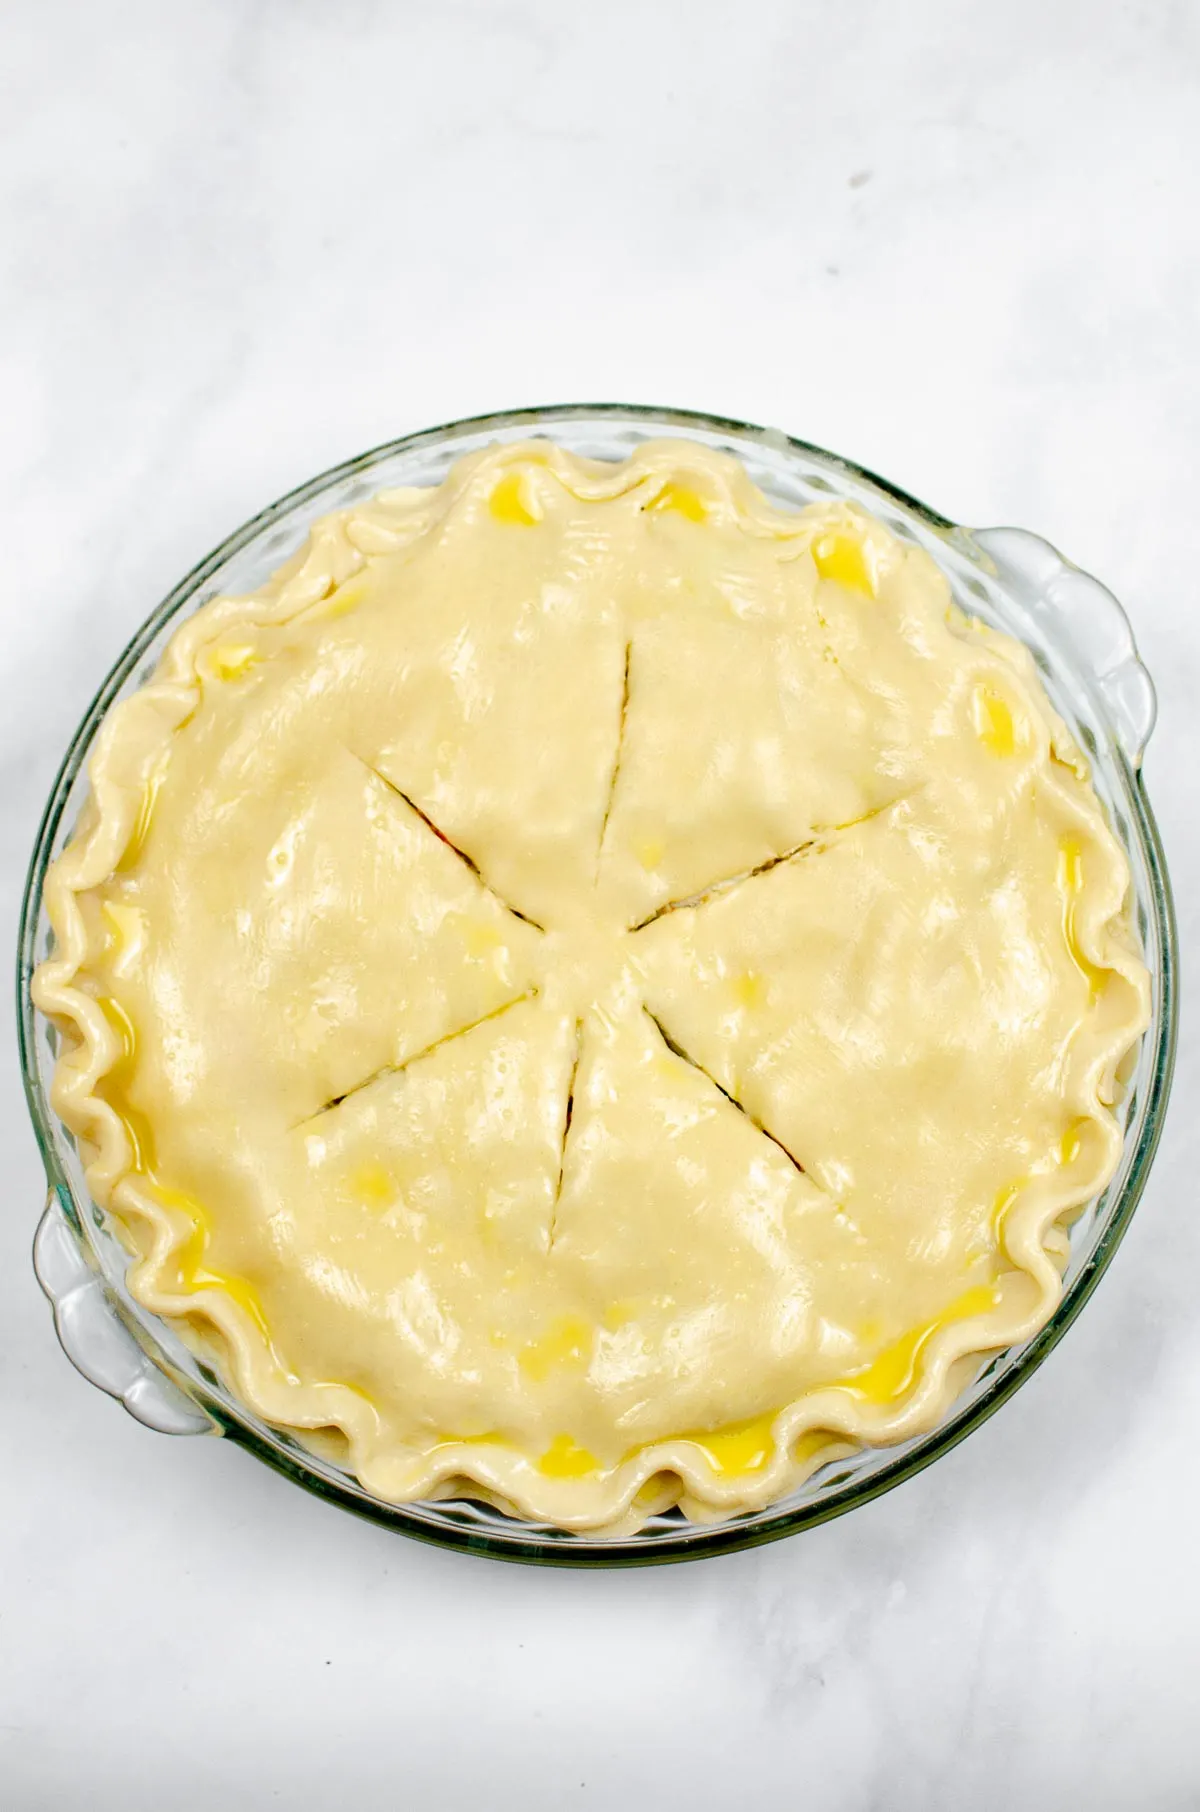 Uncooked turkey pot pie with the pie crust brushed with egg.